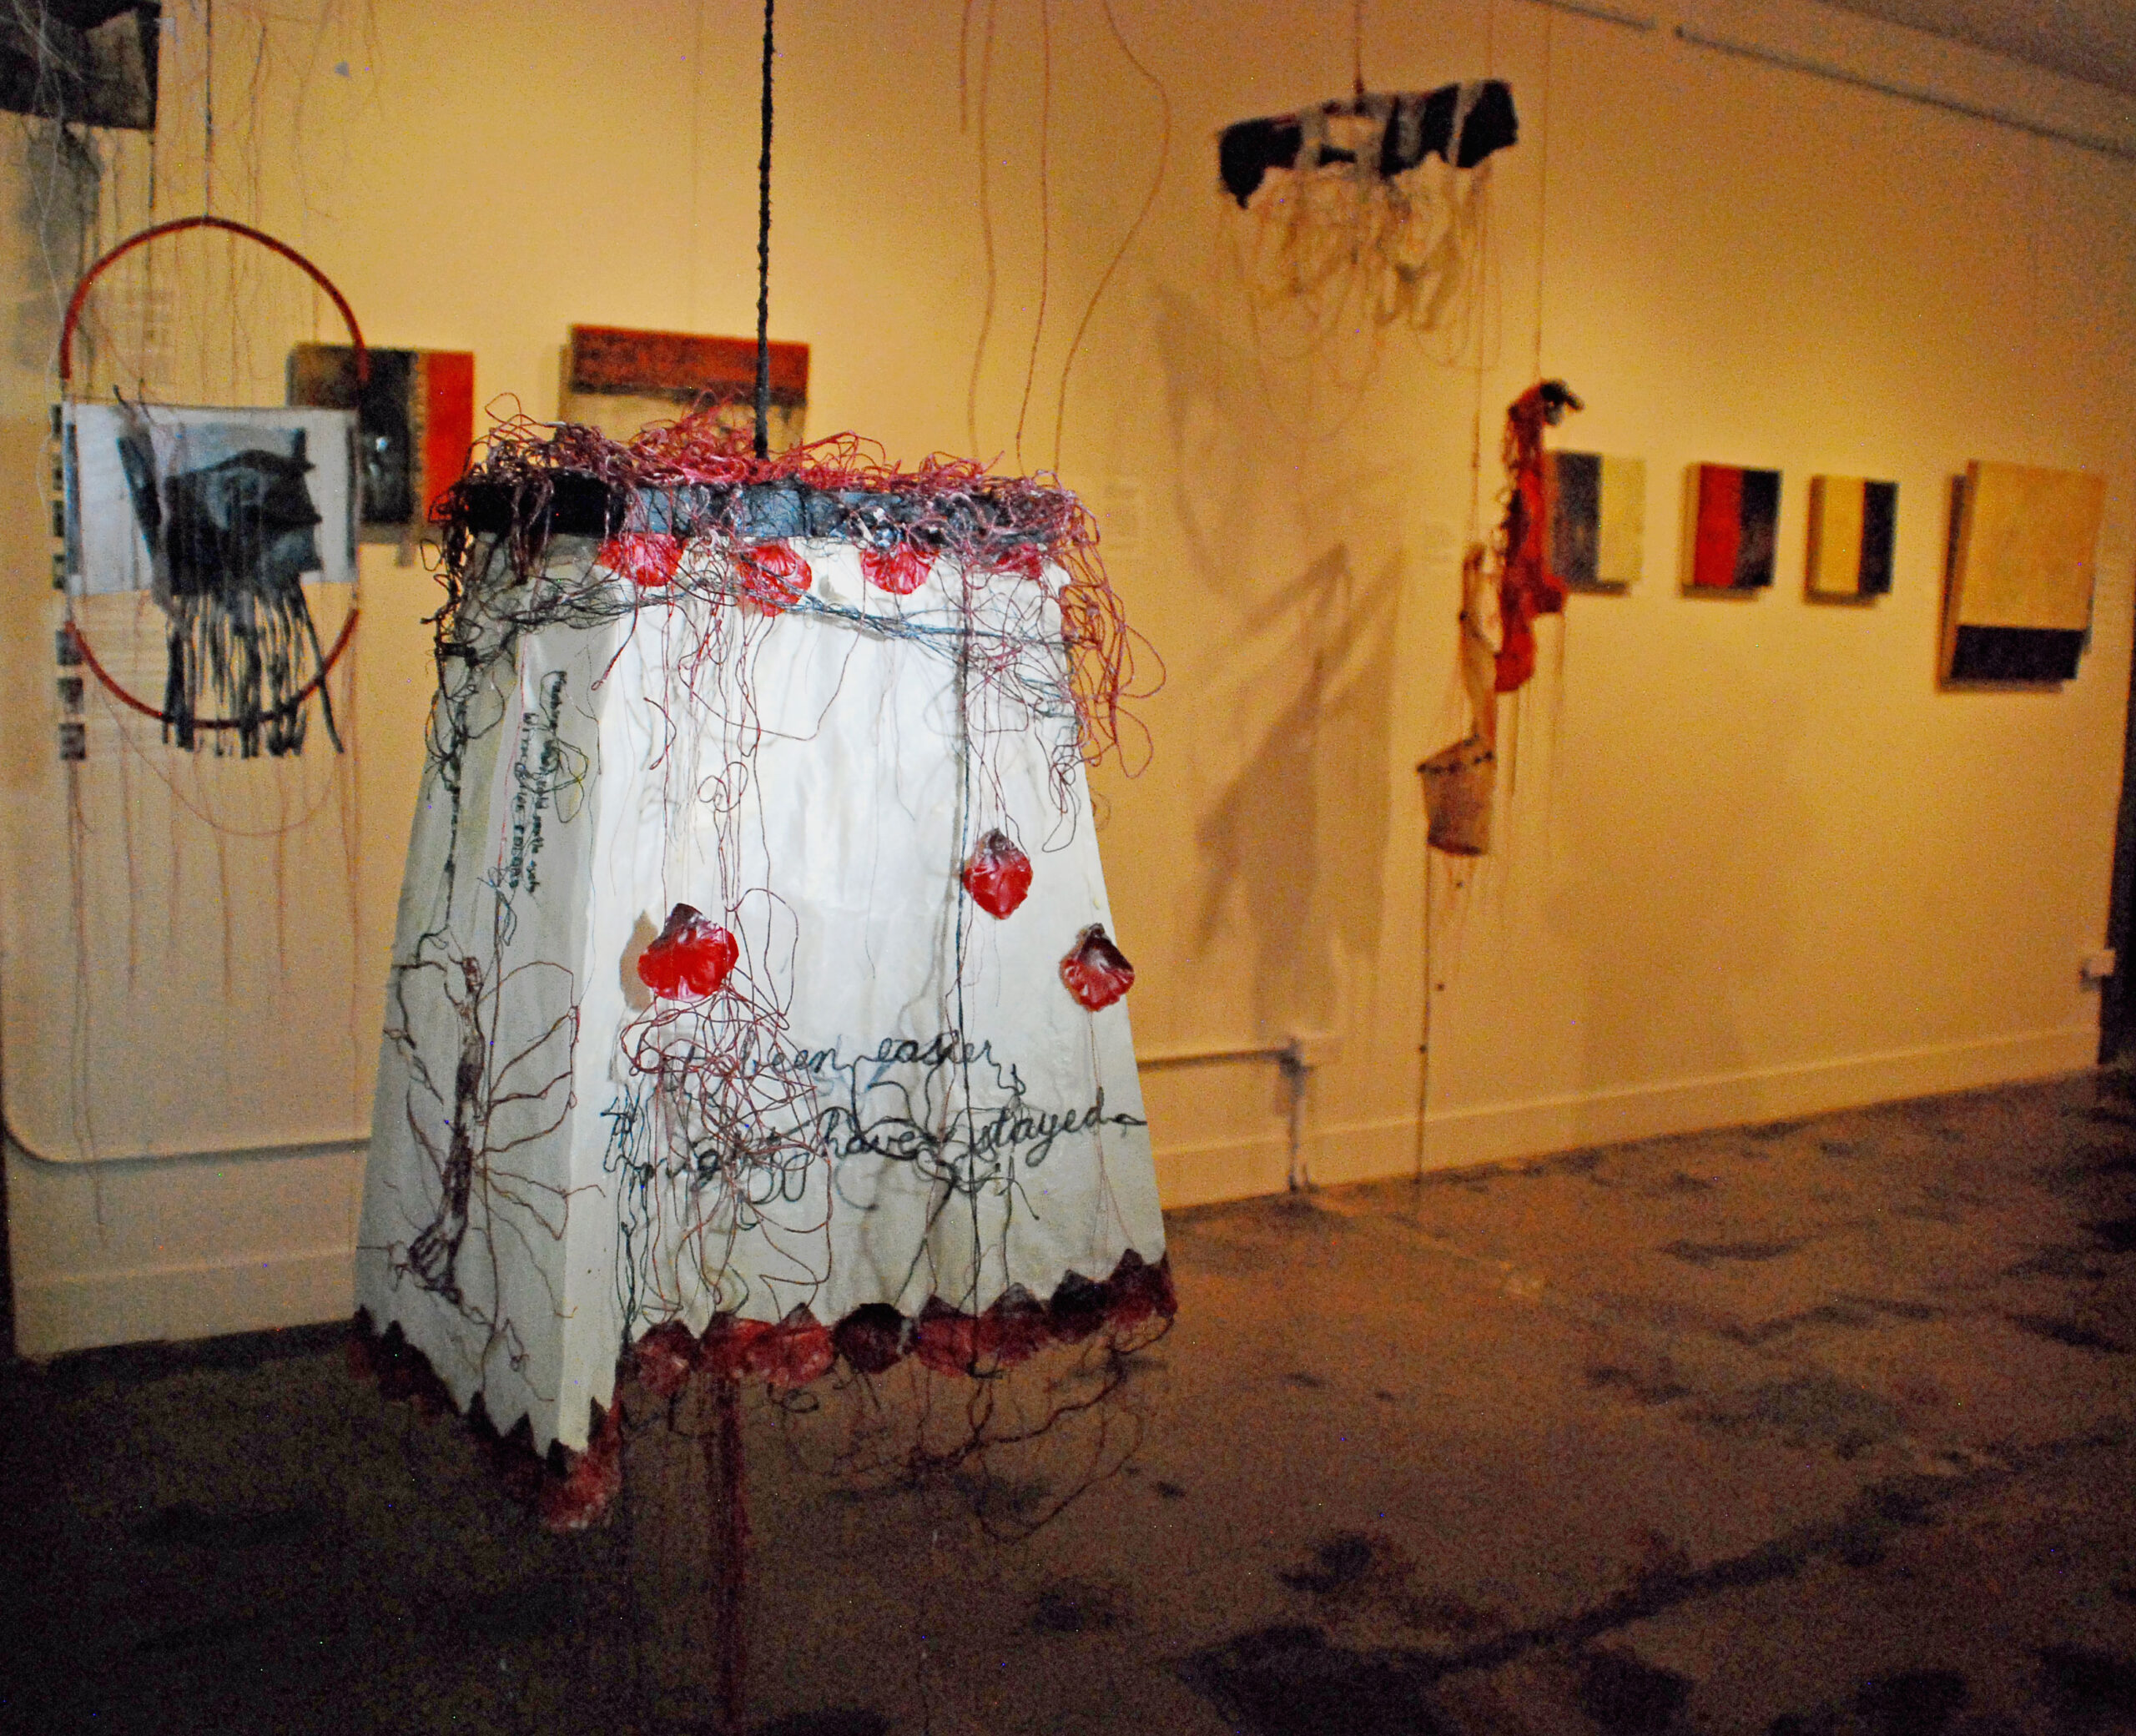 GO OR STAY?  A discarded woman’s skirt morphs into a lampshade-like four-sided suspended sculpture. Hand-embroidered cursive on opposing sides reflects the dilemma faced by migrants who must make heart-wrenching choices between staying in the homeland they love versus facing the dangers of crossing borders to seek physical safety or a viable livelihood for their family. A reminder that people do not just pick up and abandon the place they’ve lived for generations without cause. Small print embroidery at the top repeats the clothing label “Made in Bangladesh” in English and Spanish, emblematic of the juxtaposition between Fast Fashion’s makers and consumers.